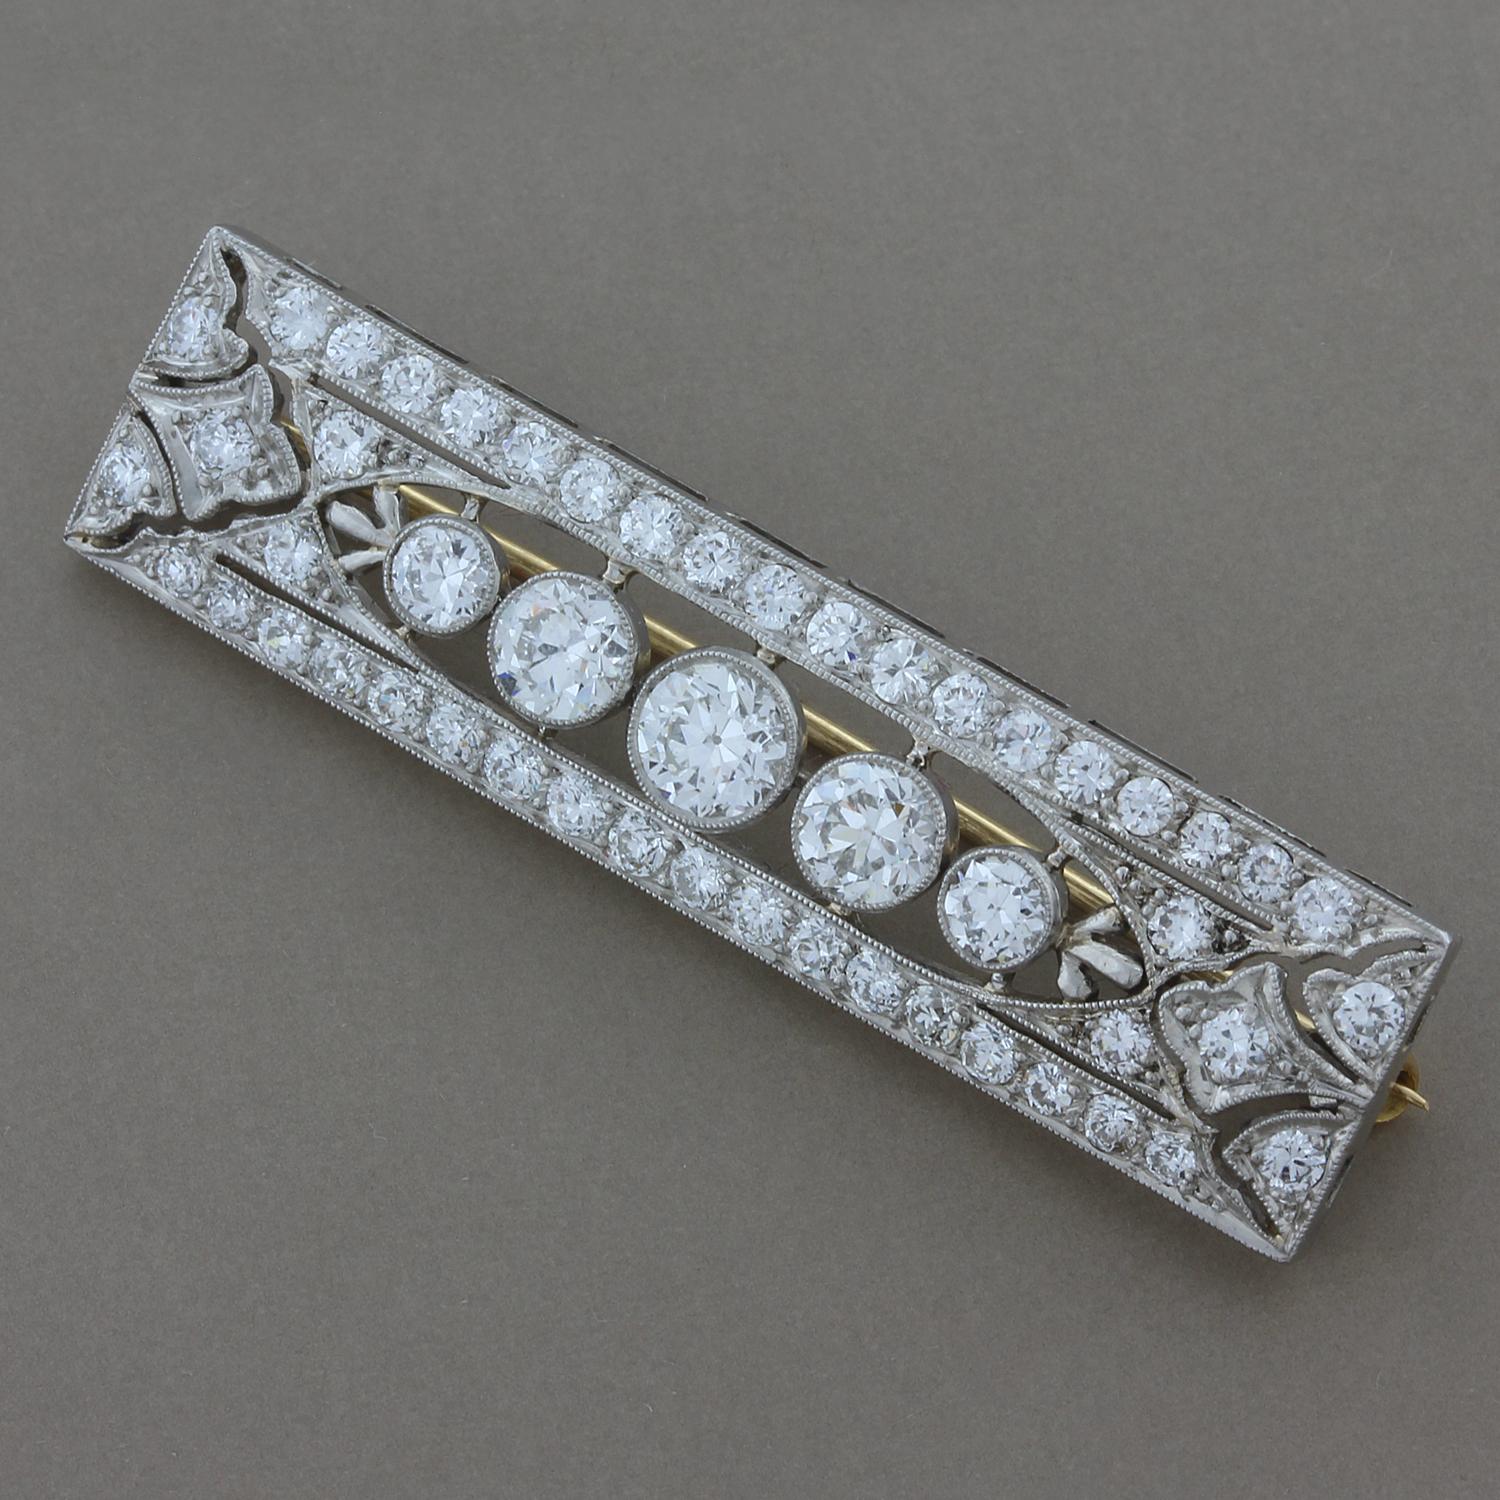 A classic Art Deco/Edwardian style piece, this bar pin brooch features 3 carats of European cut diamonds set in platinum. Finished with fine miligrain on the edges of the platinum and a 14K gold pin. A piece transitioning from the Edwardian filigree